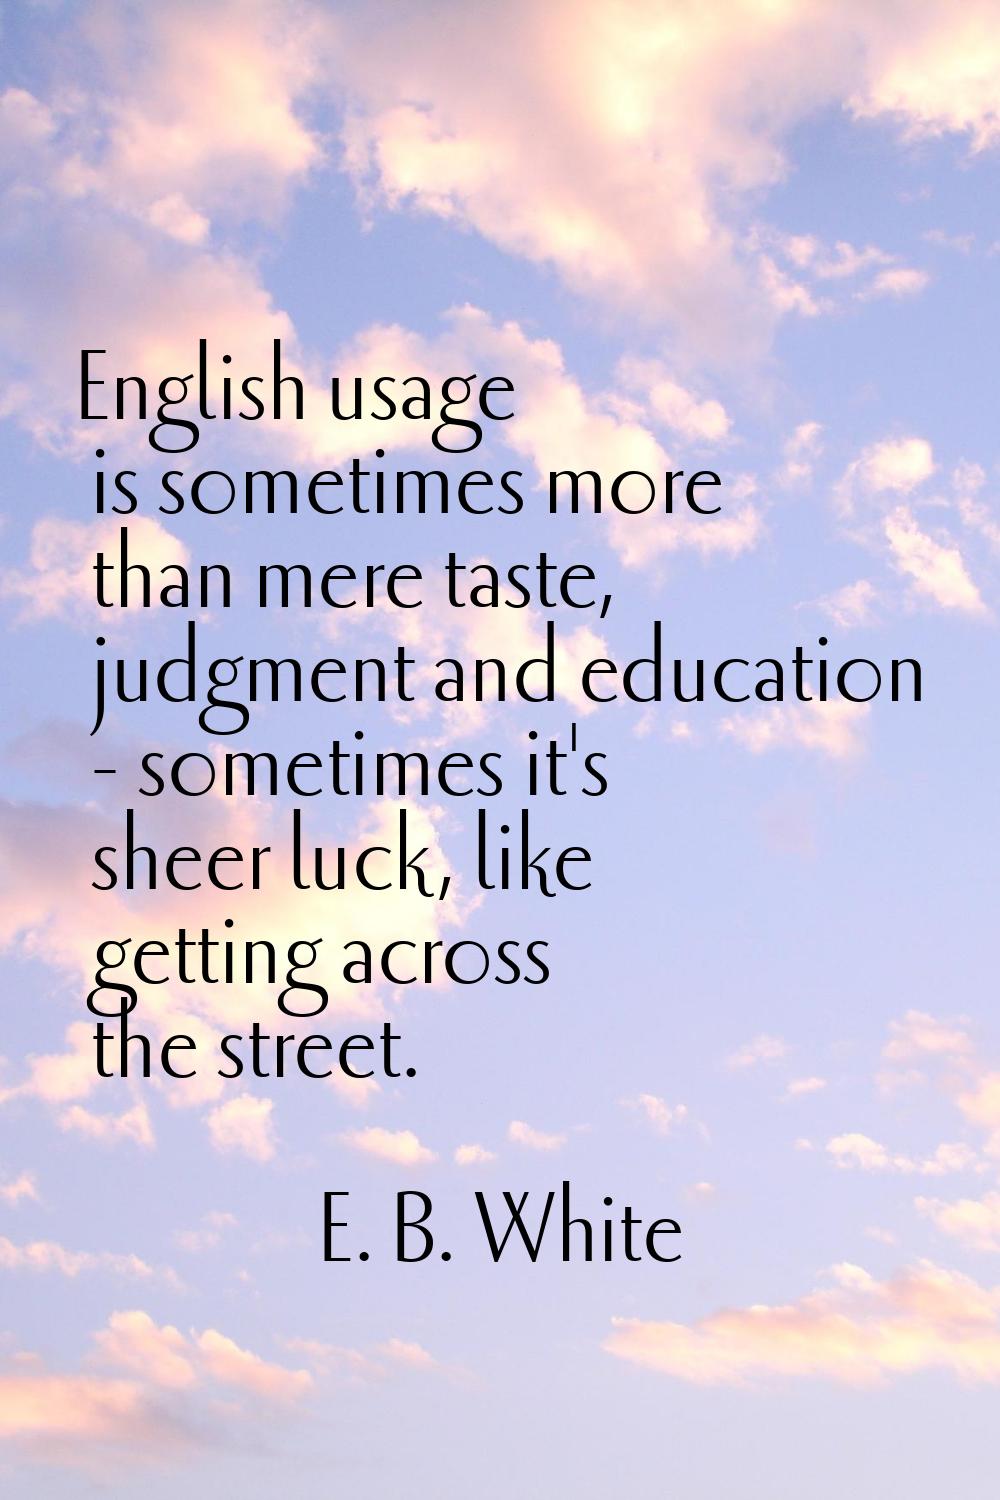 English usage is sometimes more than mere taste, judgment and education - sometimes it's sheer luck